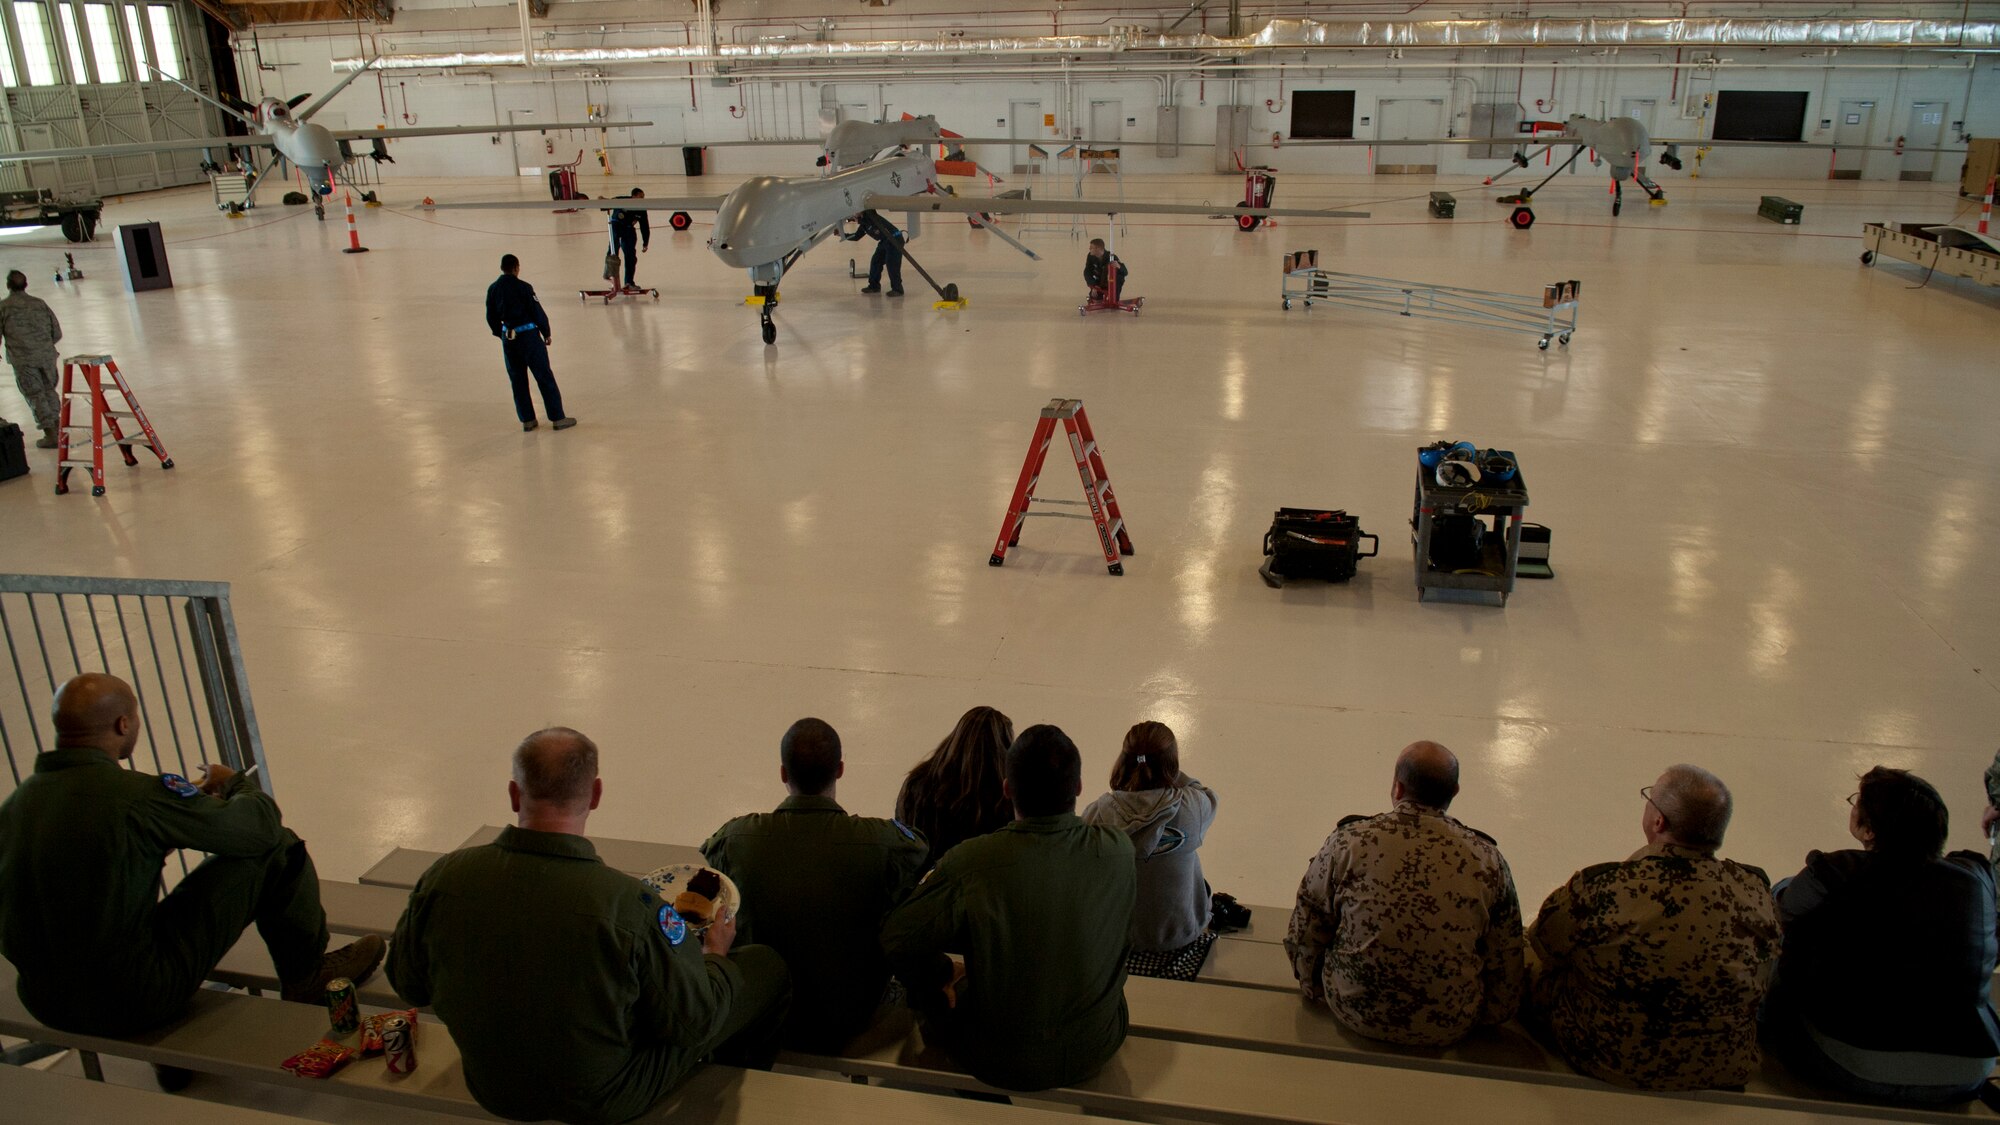 The MQ-1 Predator build team secures the wings during a build-team demonstration at Holloman Air Force Base, N.M., Jan. 17. The MQ-1 build team demonstrates the airmen’s ability to build and prepare an MQ-1 after delivery. The build team travels to different locations to showcase the expedient process of assembly, which on average takes just over half an hour to complete. (U.S. Air Force photo by Airman 1st Class Aaron Montoya / Released)